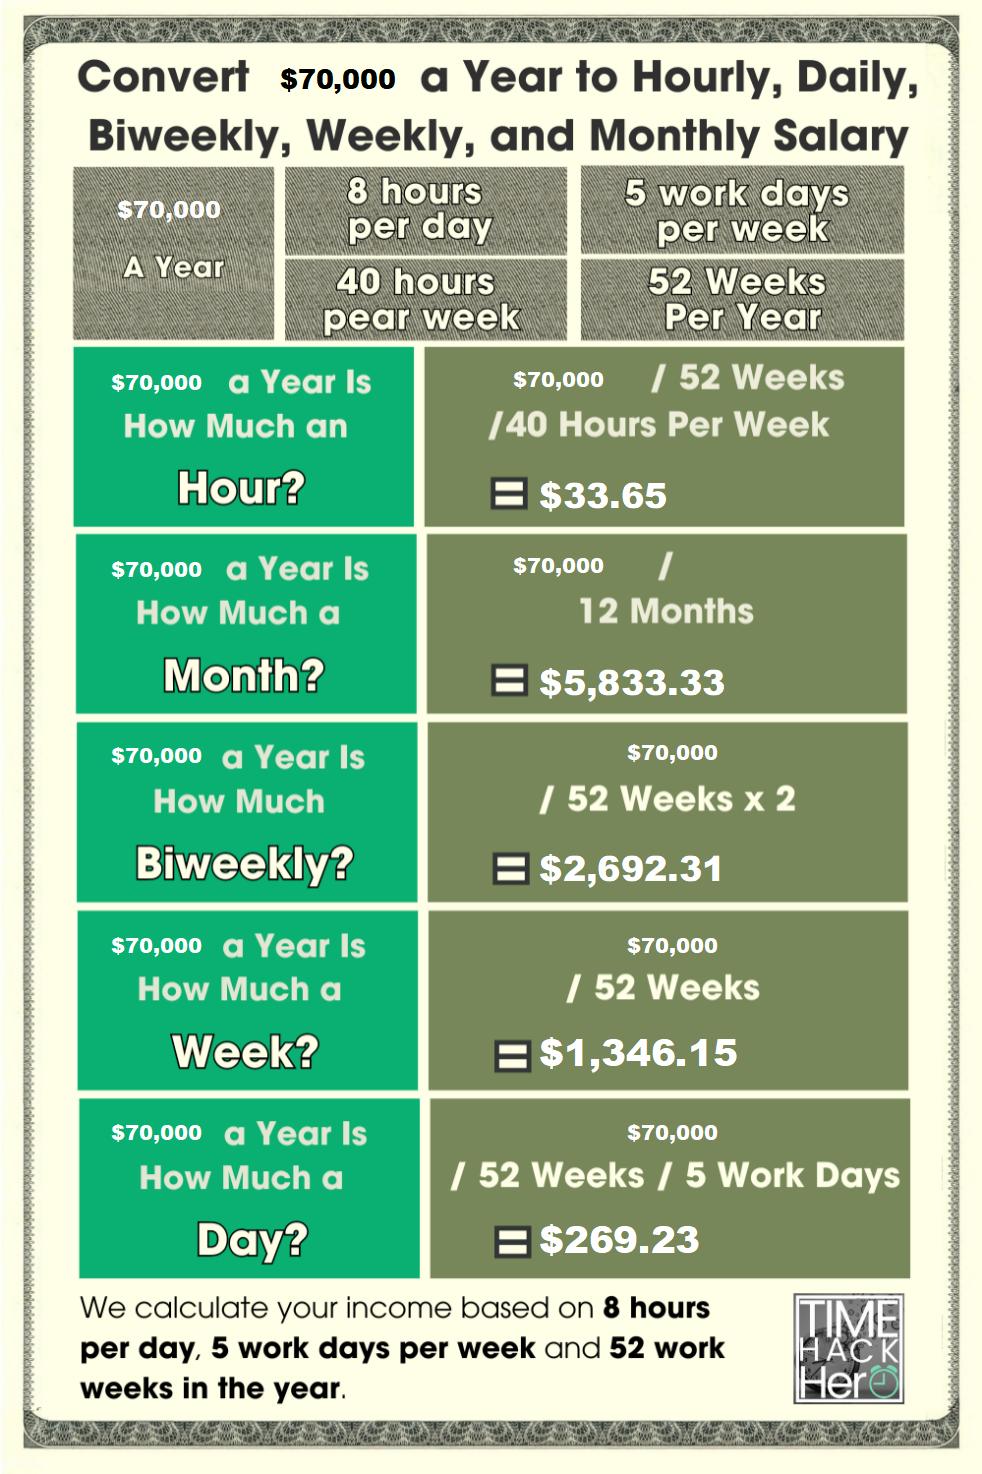 $70,000 a Year is How Much an Hour?